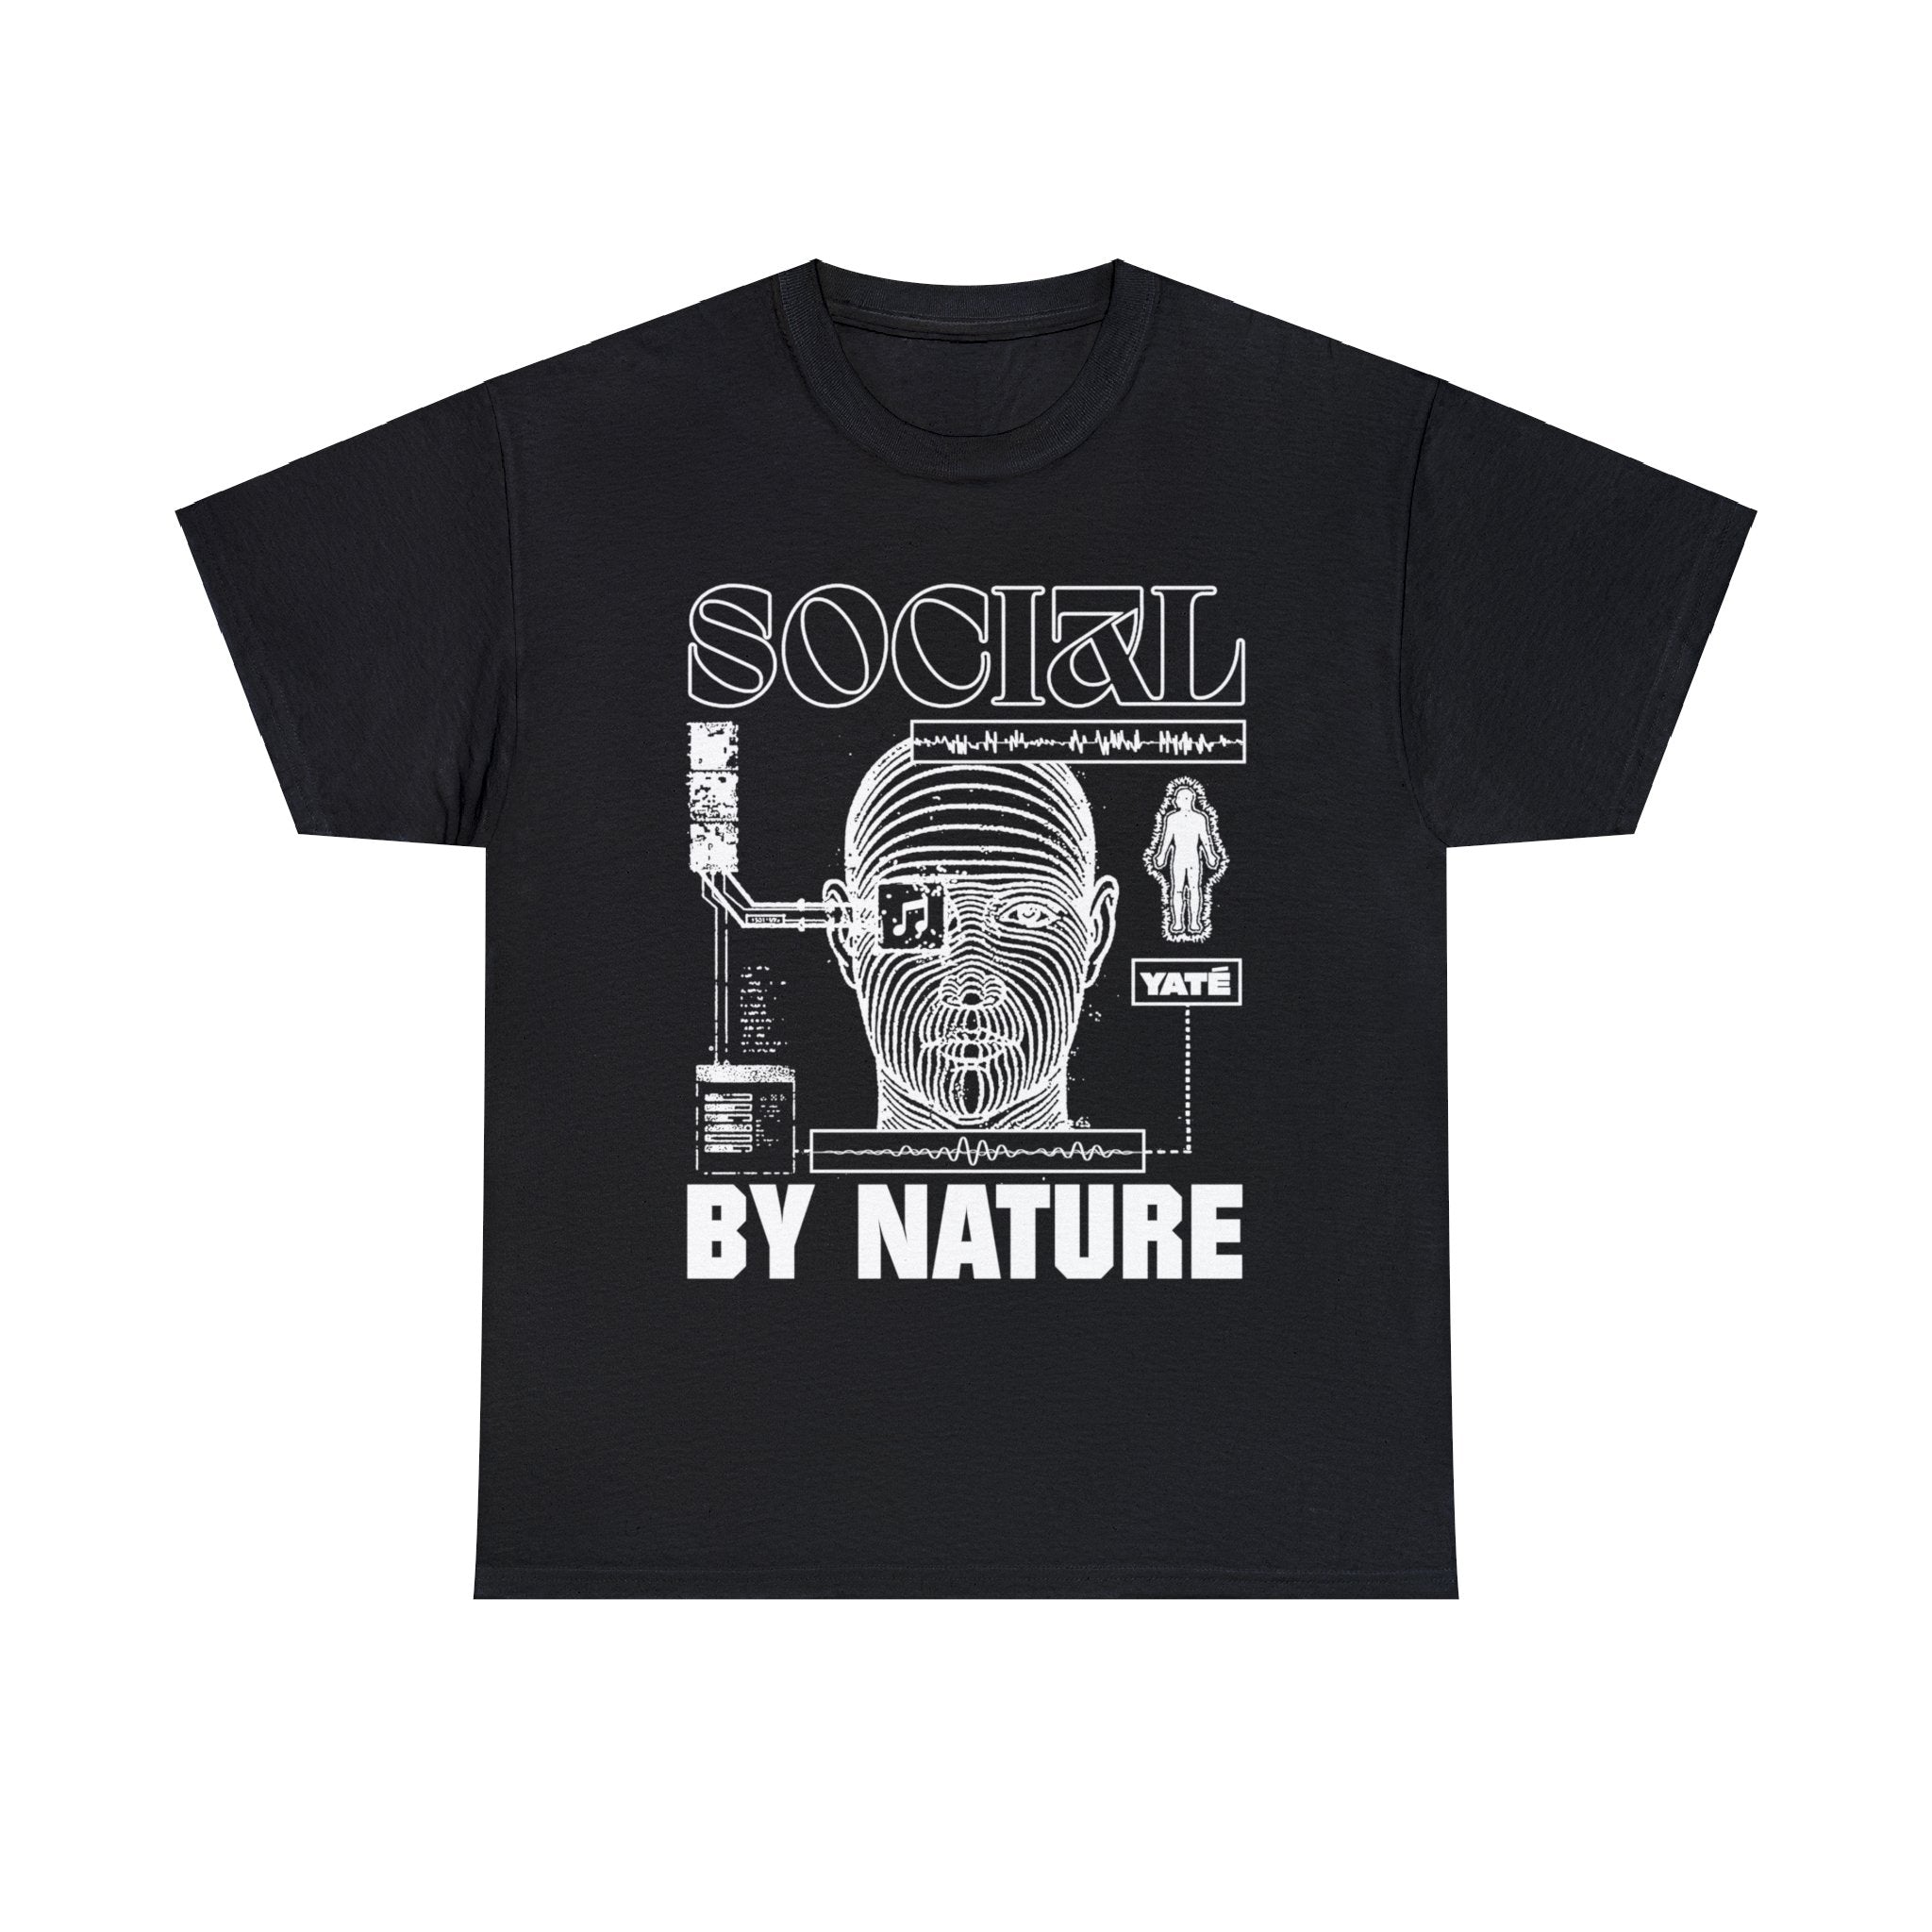 Social by Nature Tee